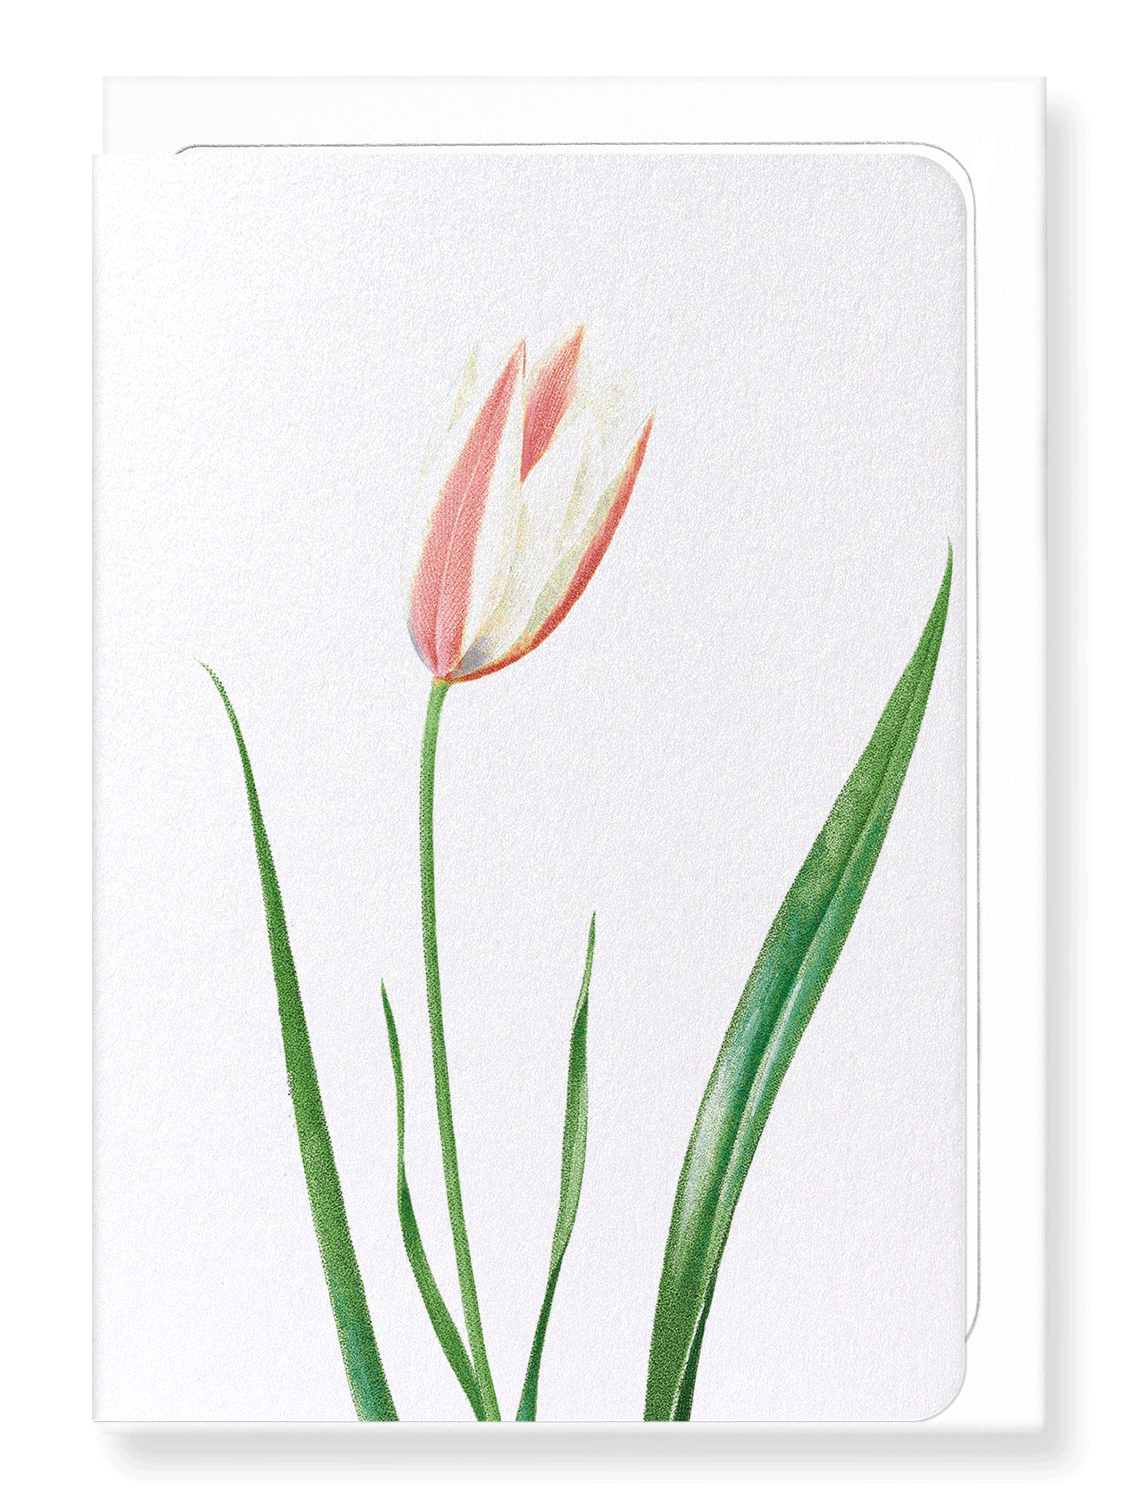 Ezen Designs - Lady tulip (detail) - Greeting Card - Front